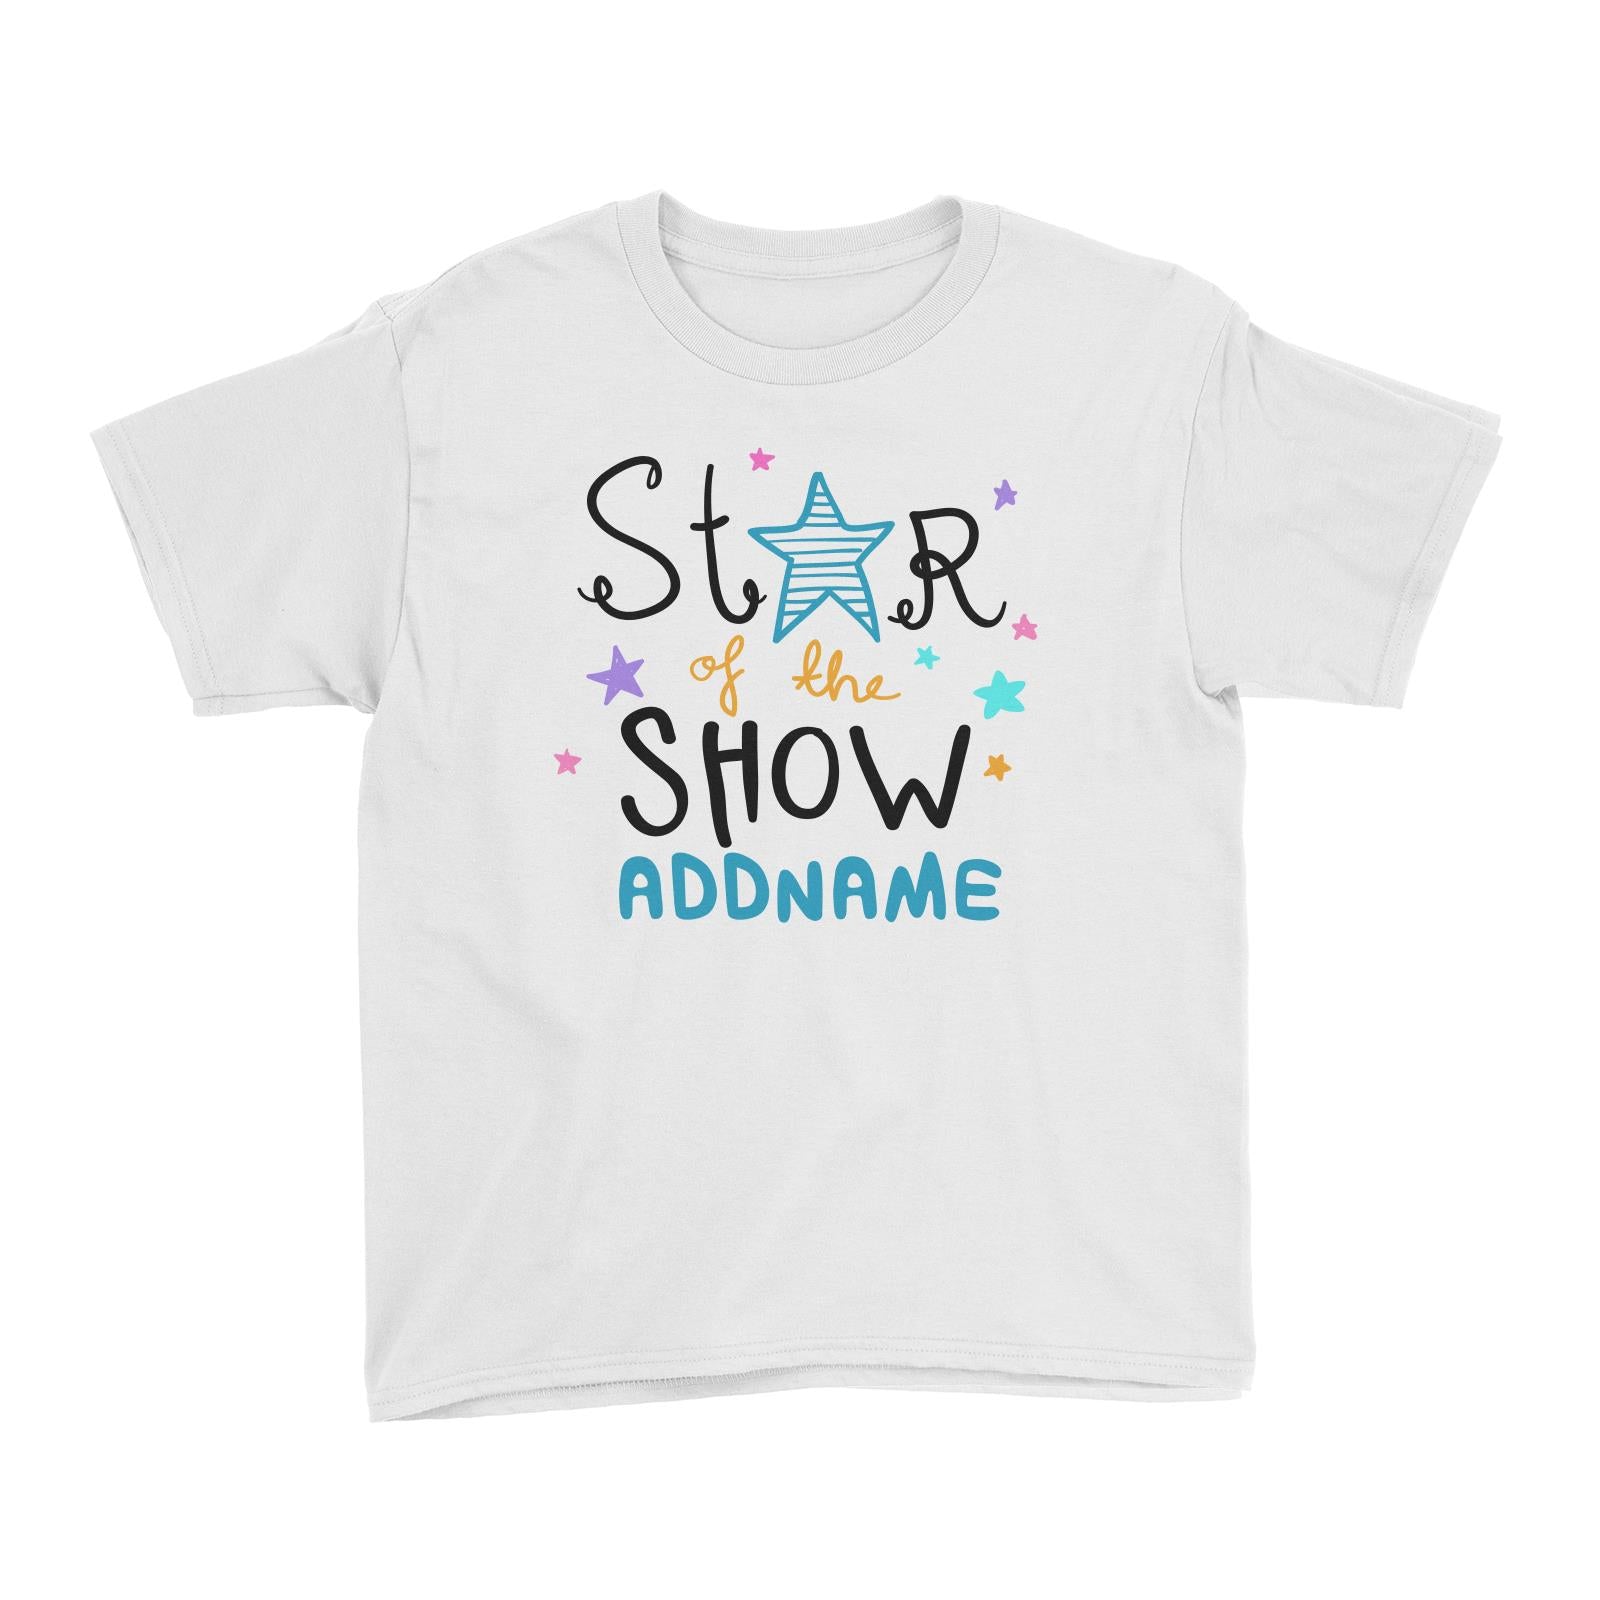 Children's Day Gift Series Star Of The Show Blue Addname Kid's T-Shirt